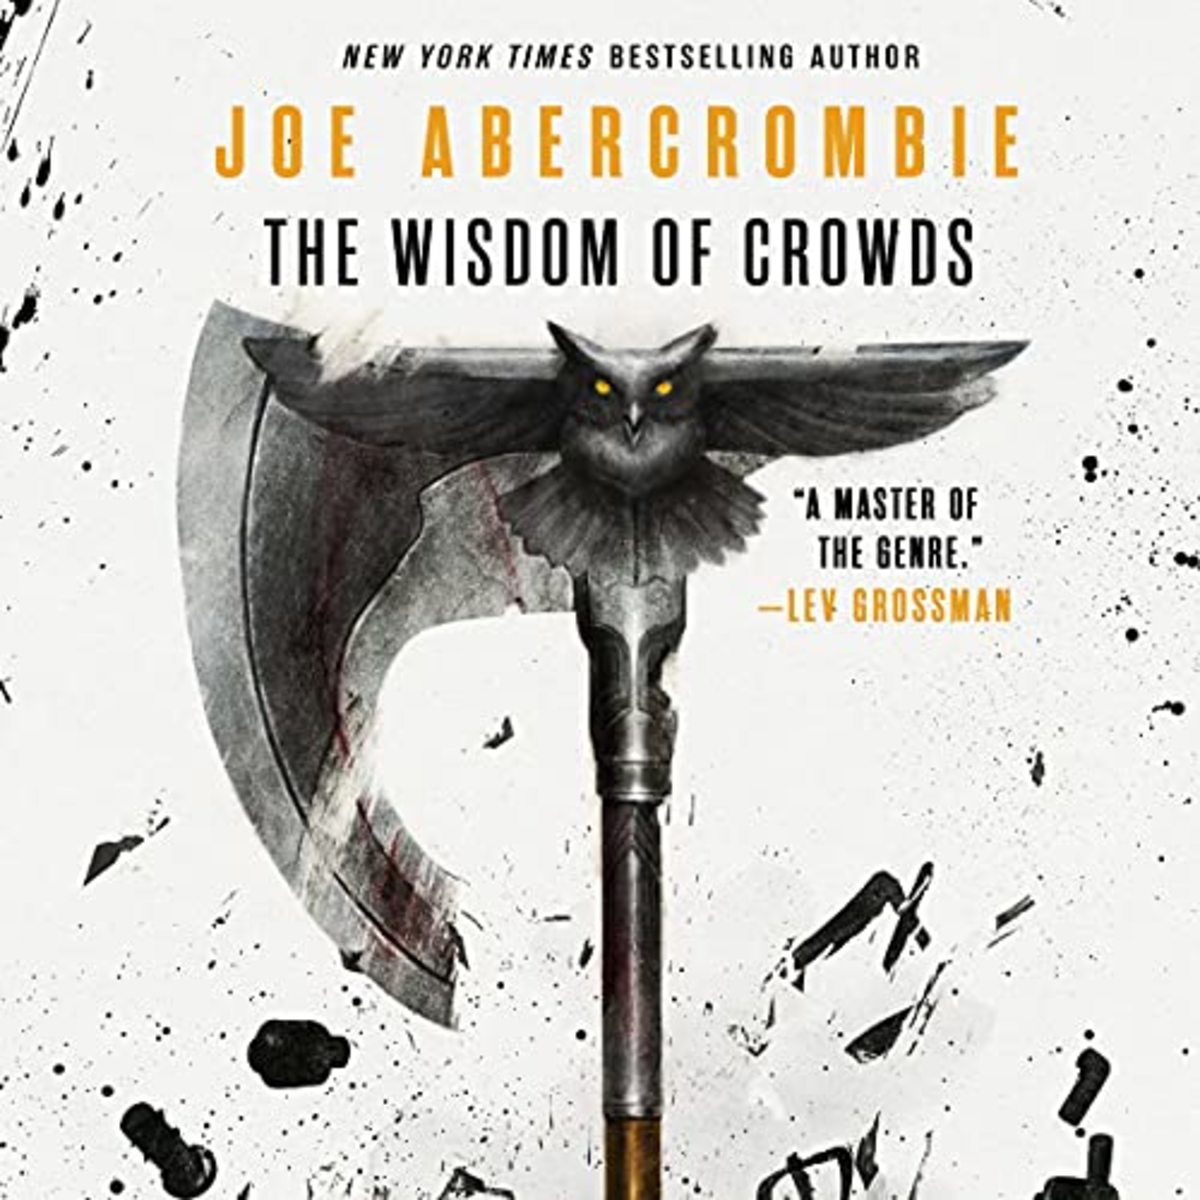 Review of The Wisdom of Crowds